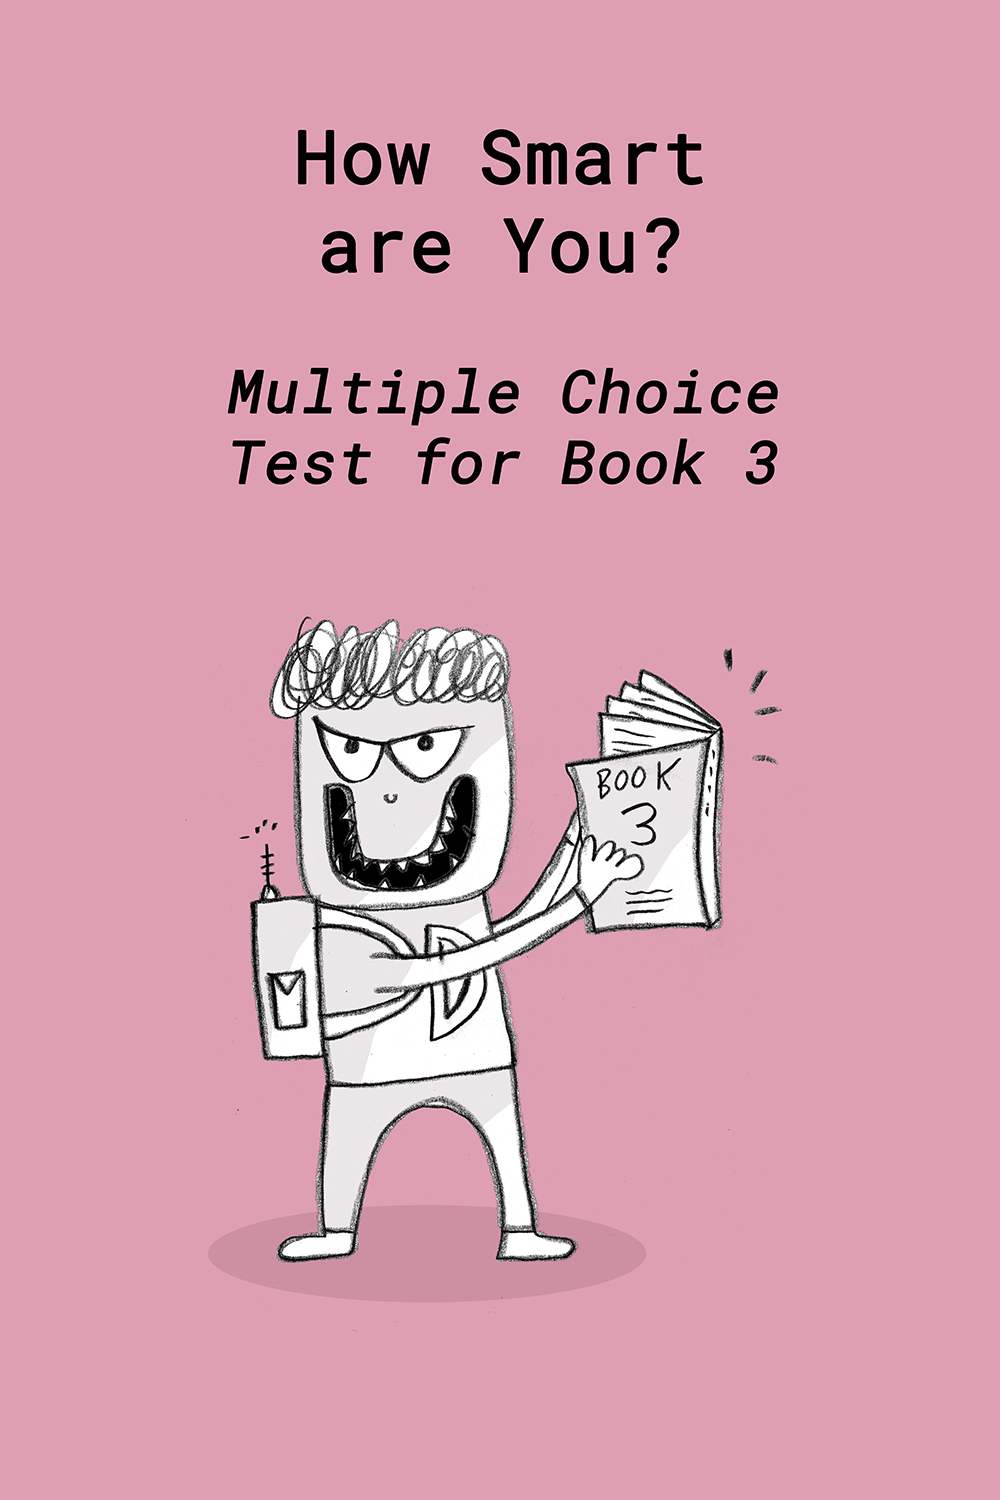 Multiple Choice for Book 3